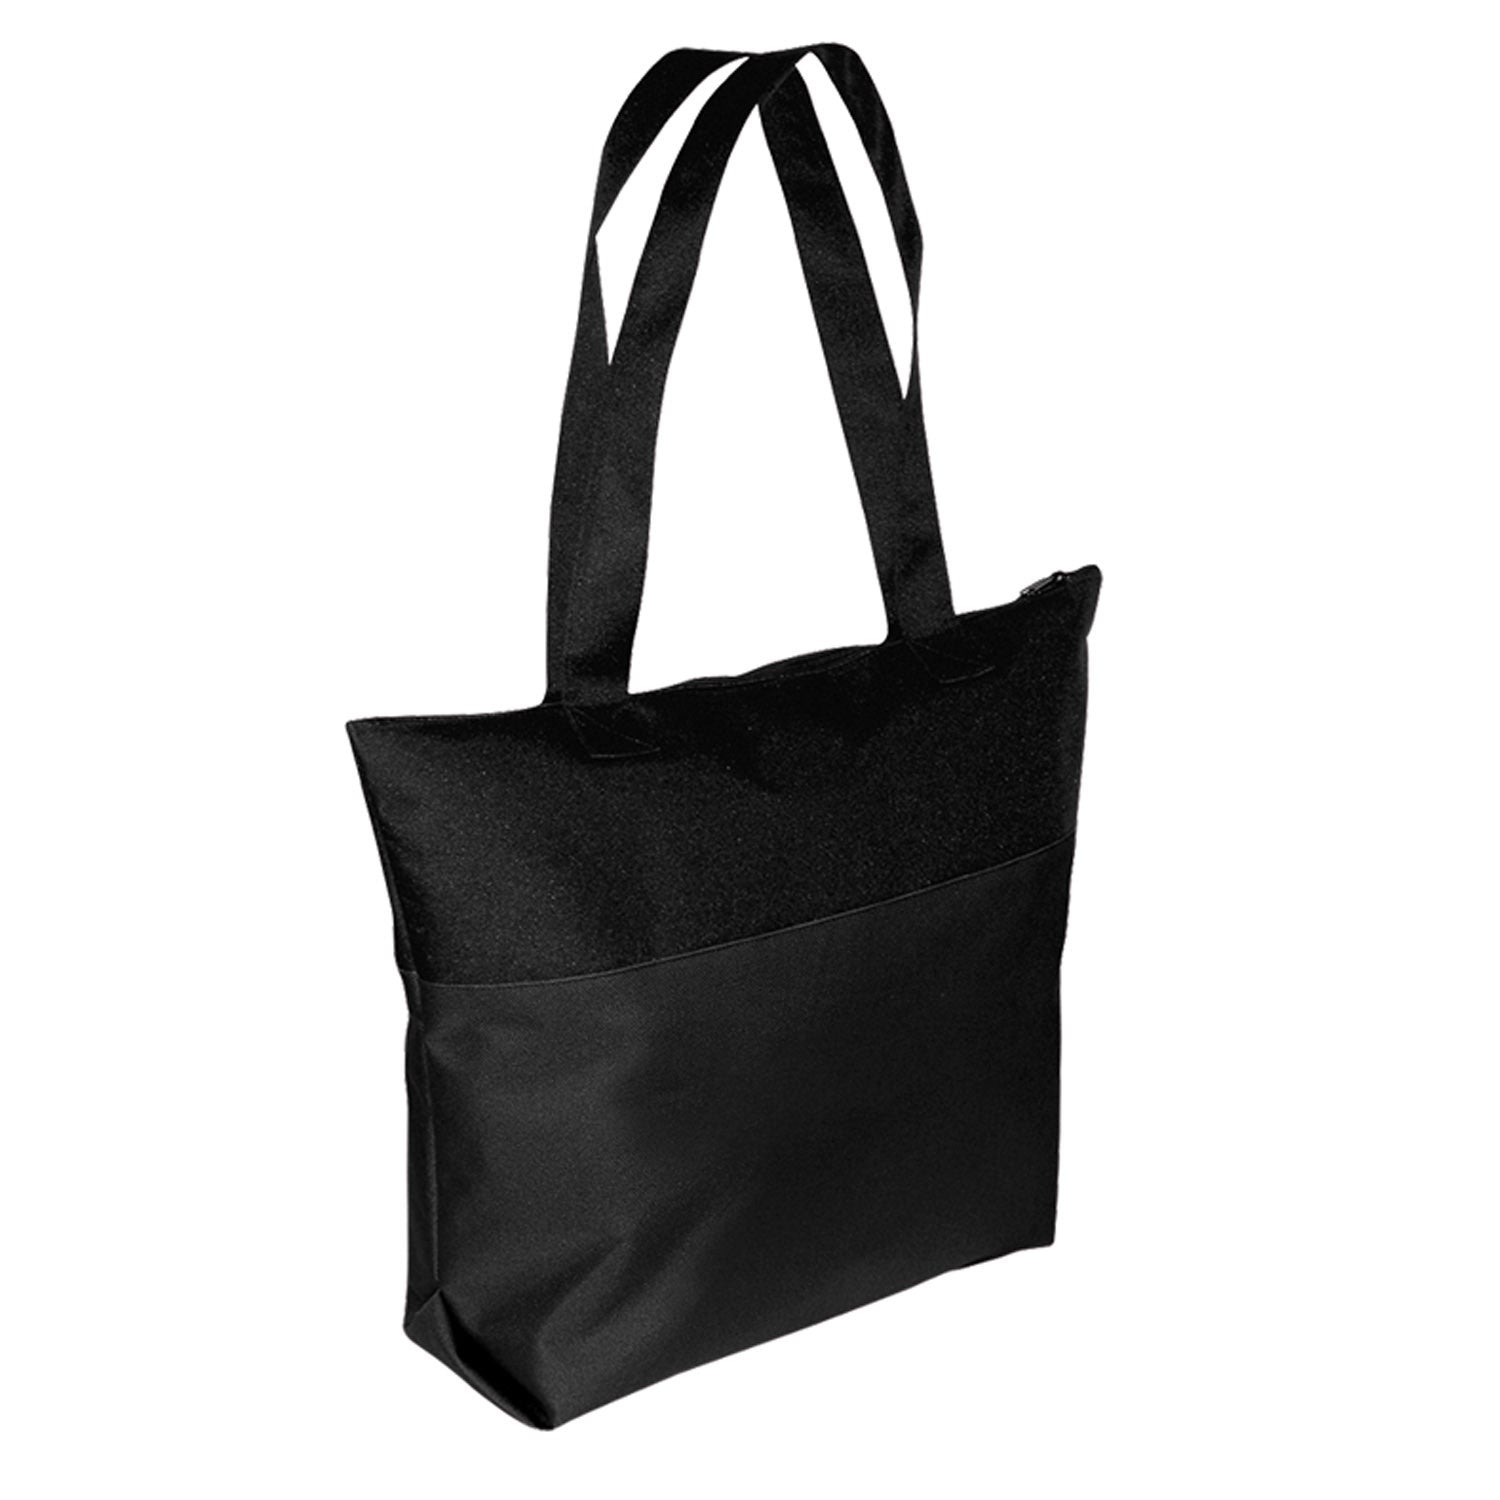 Executive Jute Conference Bags Manufacturer Supplier from Ghaziabad India